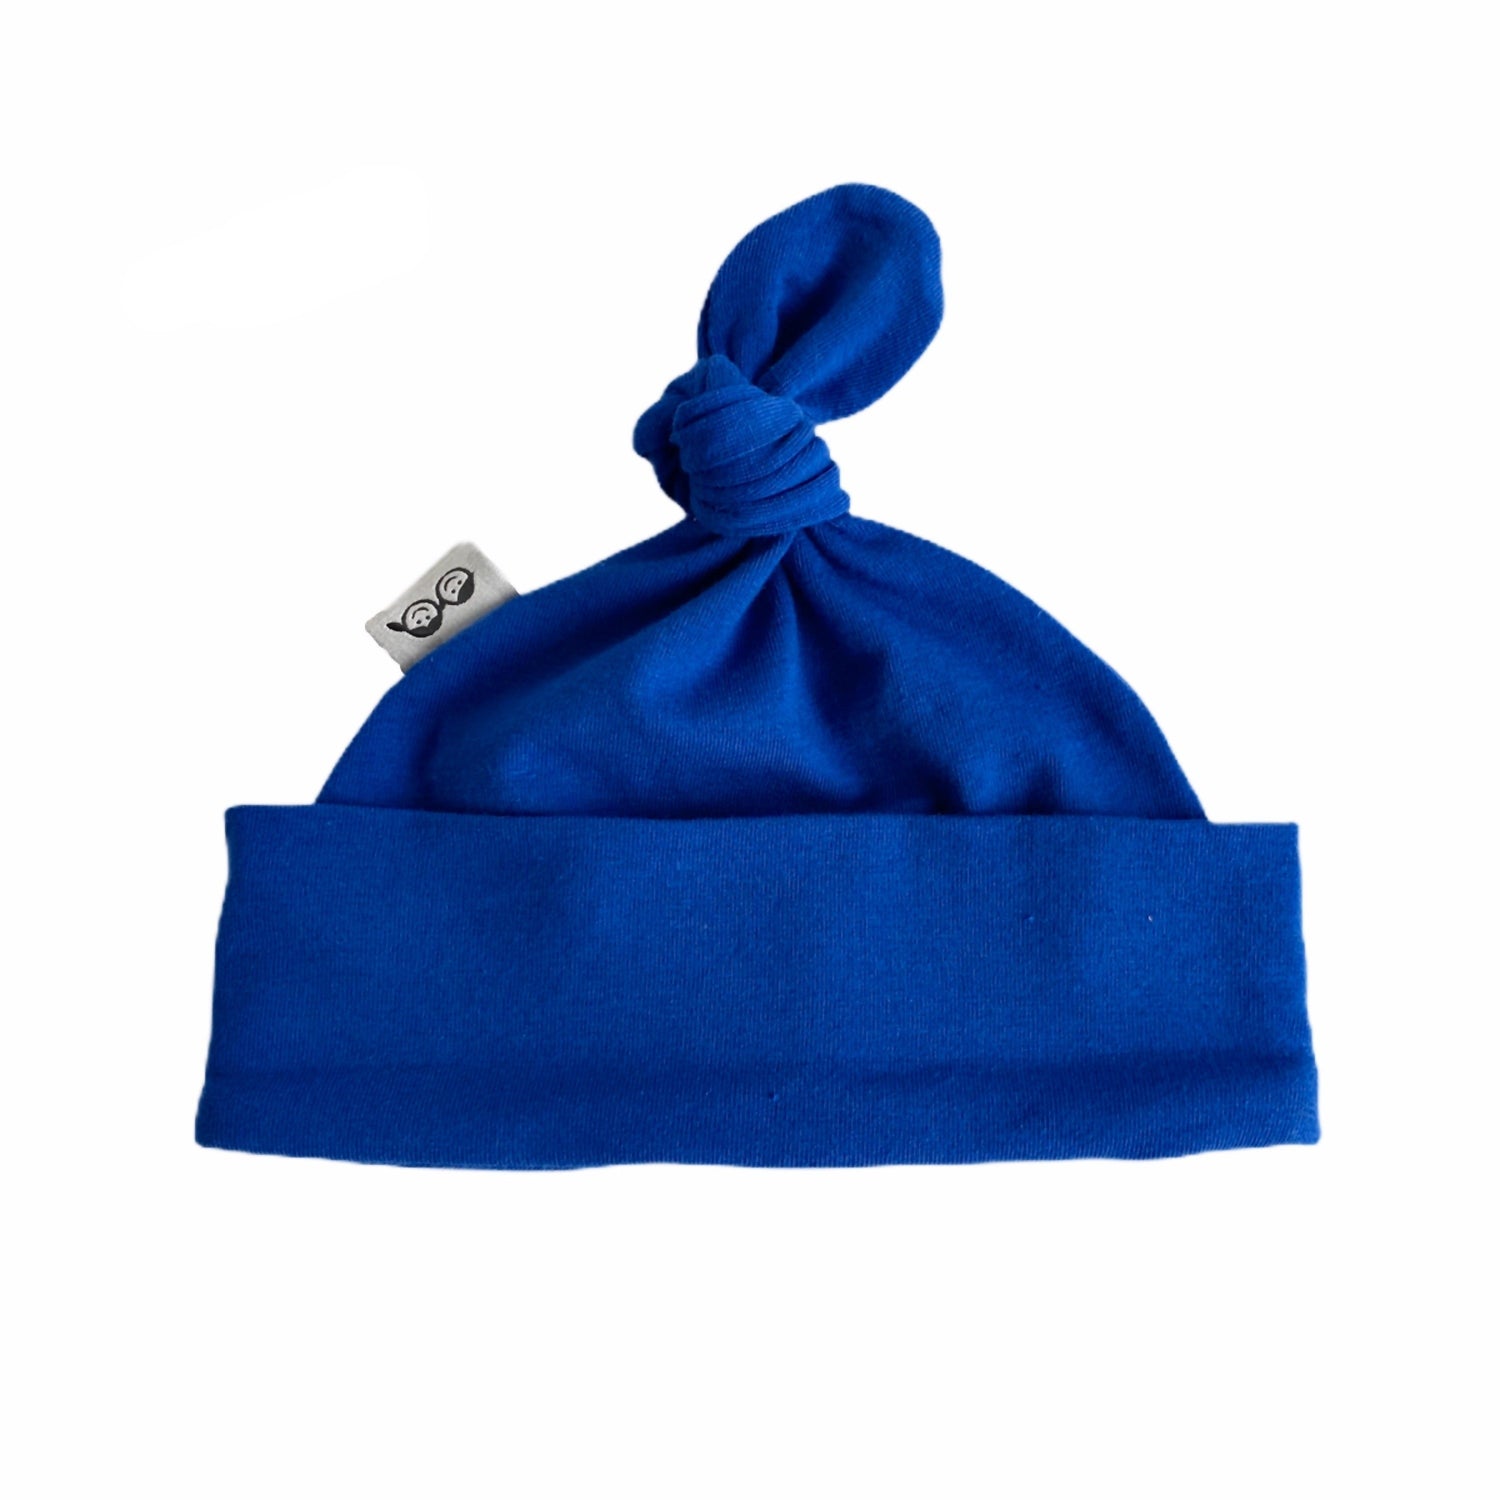 Royal Blue Leggings and/or Beanie Knot Hat